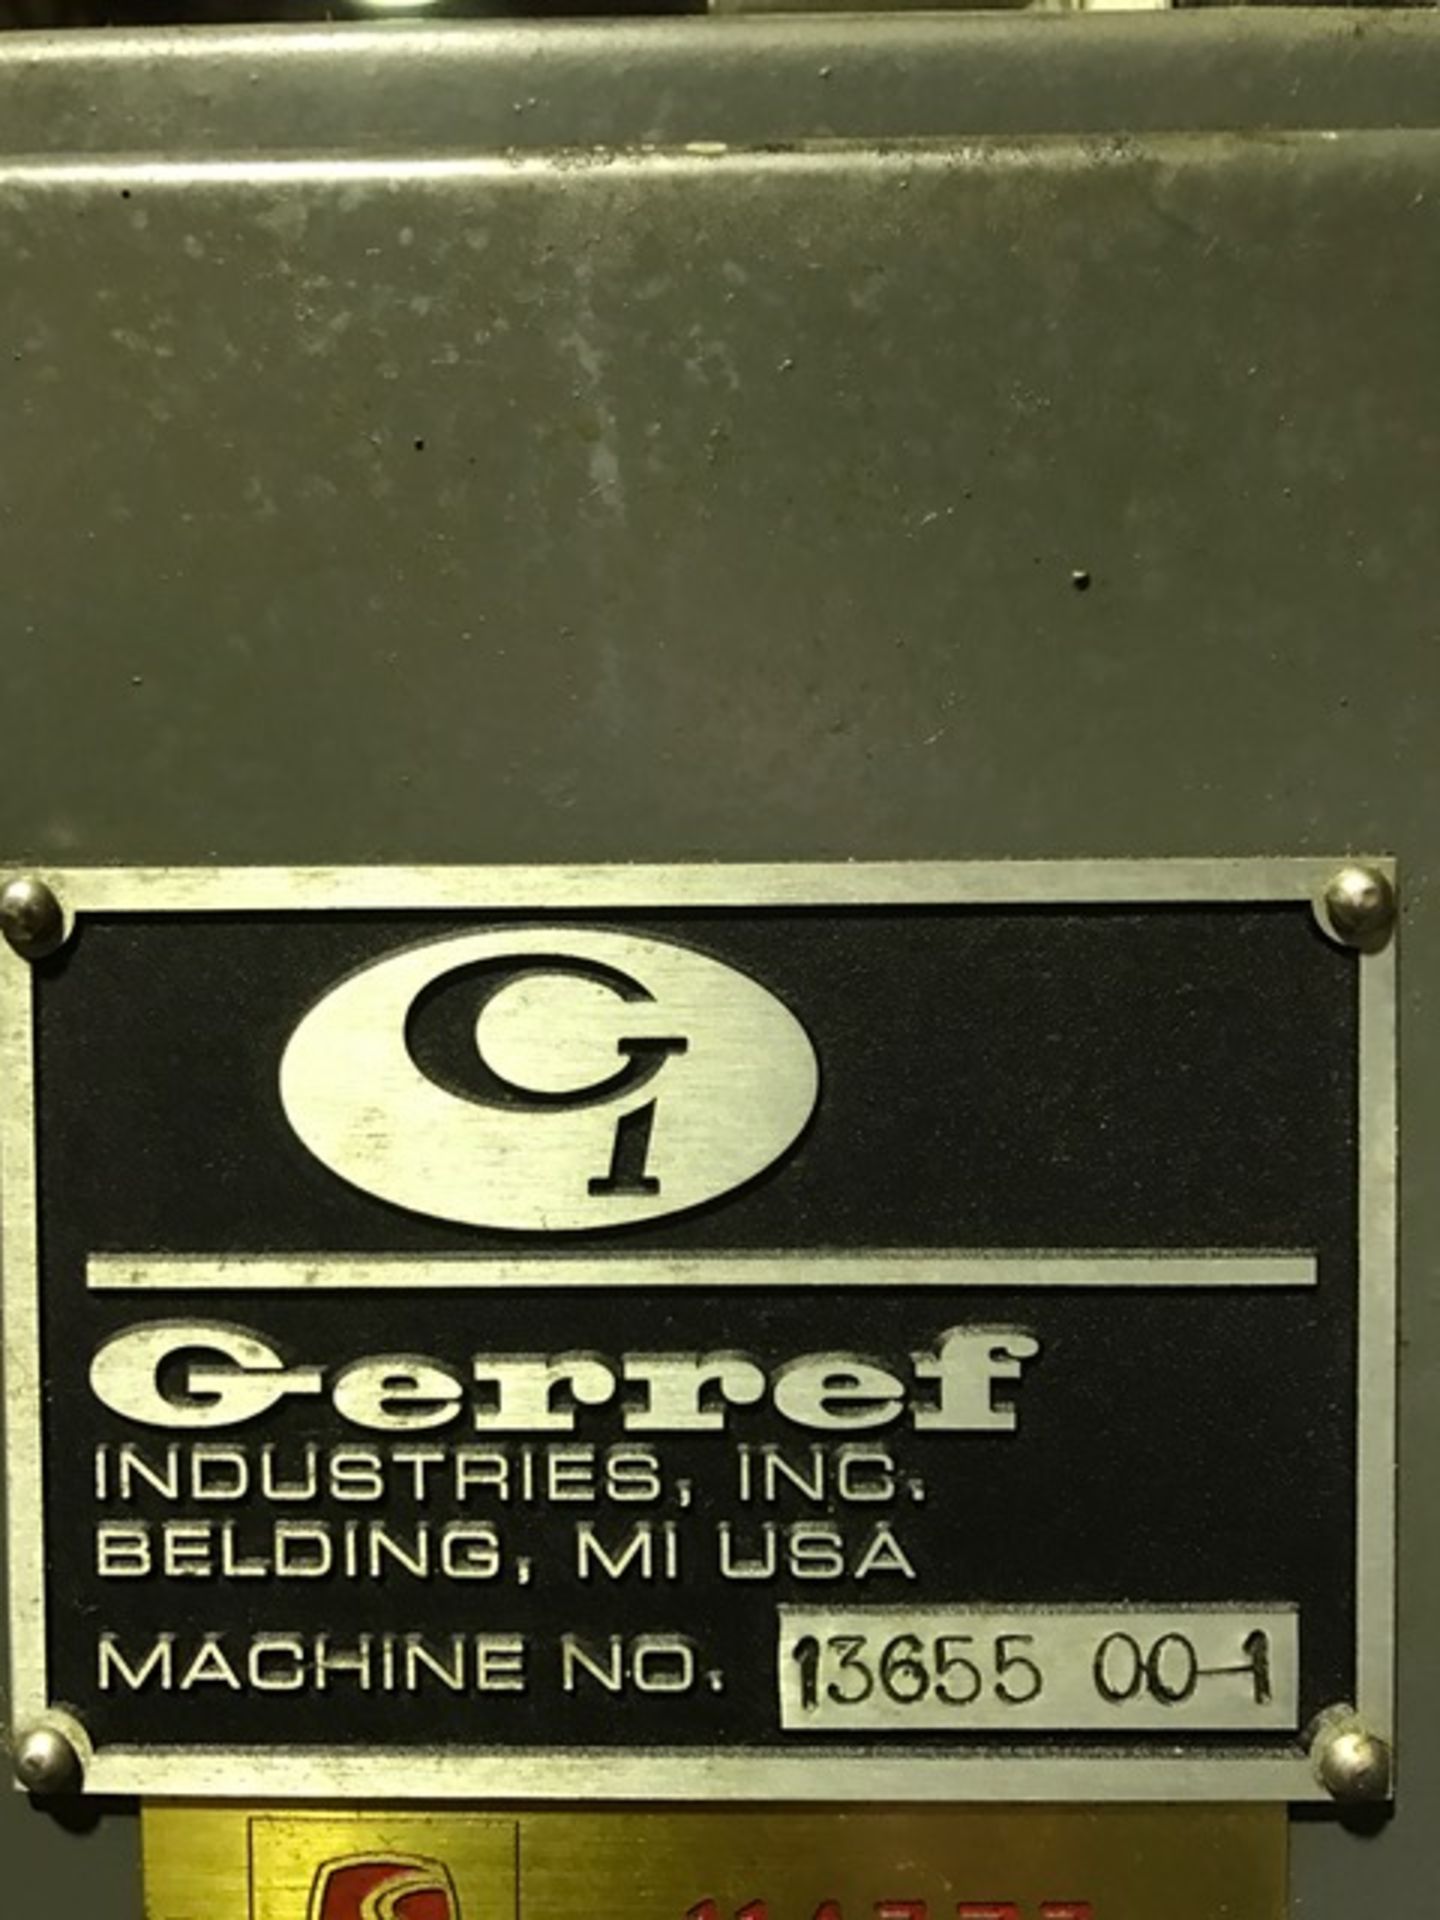 GEROFF PARTS WASHERS (LOT OF 2) SN'S. 13655 00-1 & 13655 00-2, LOCATION MI, BUYER TO SHIP - Image 5 of 5